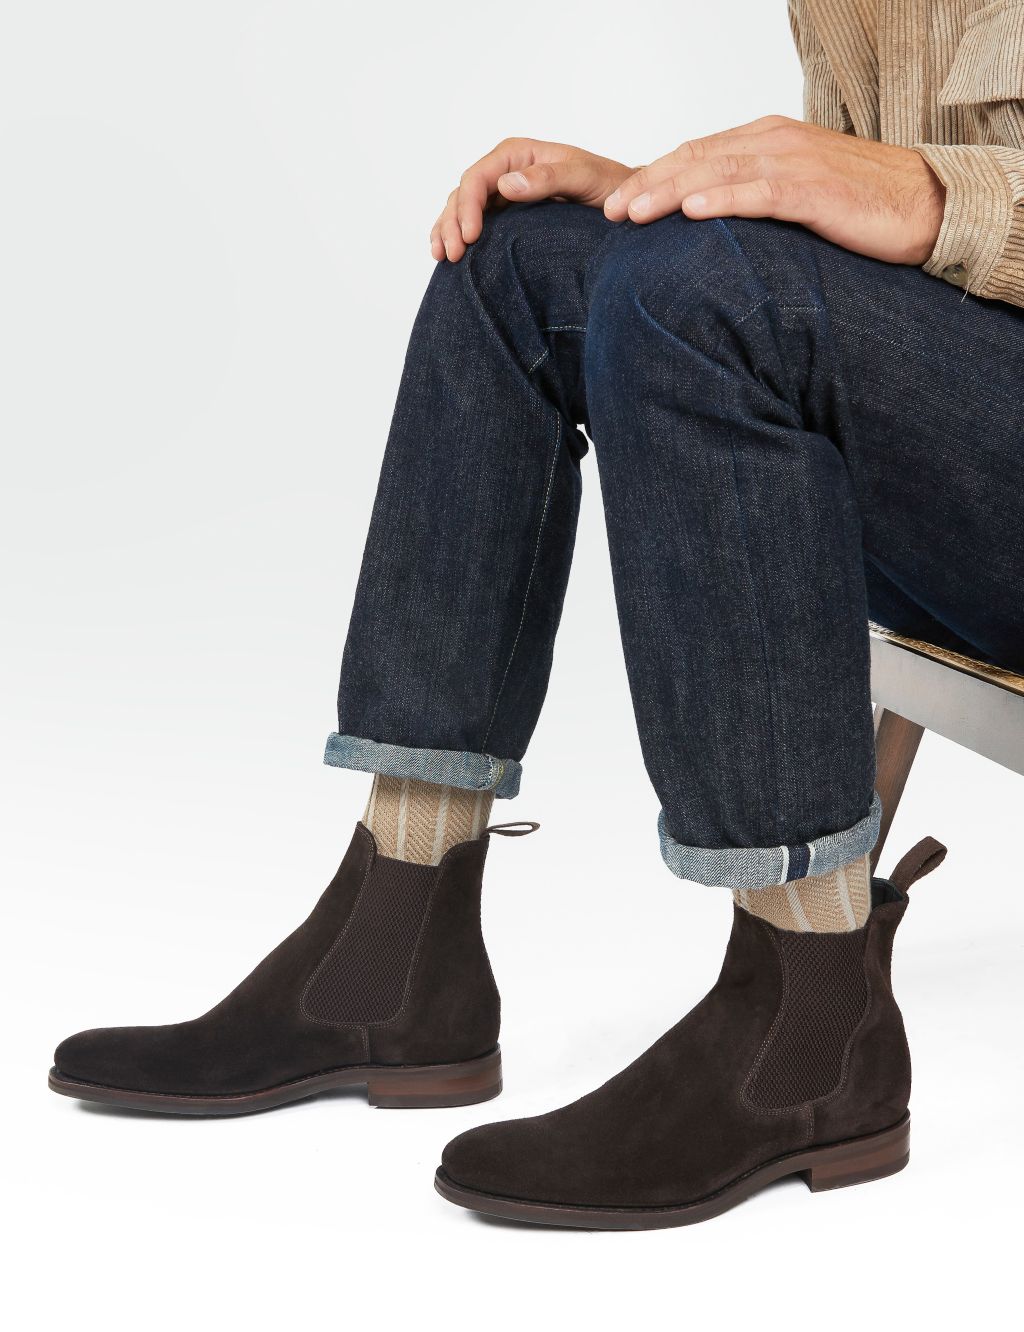 Suede Pull-On Chelsea Boots image 1